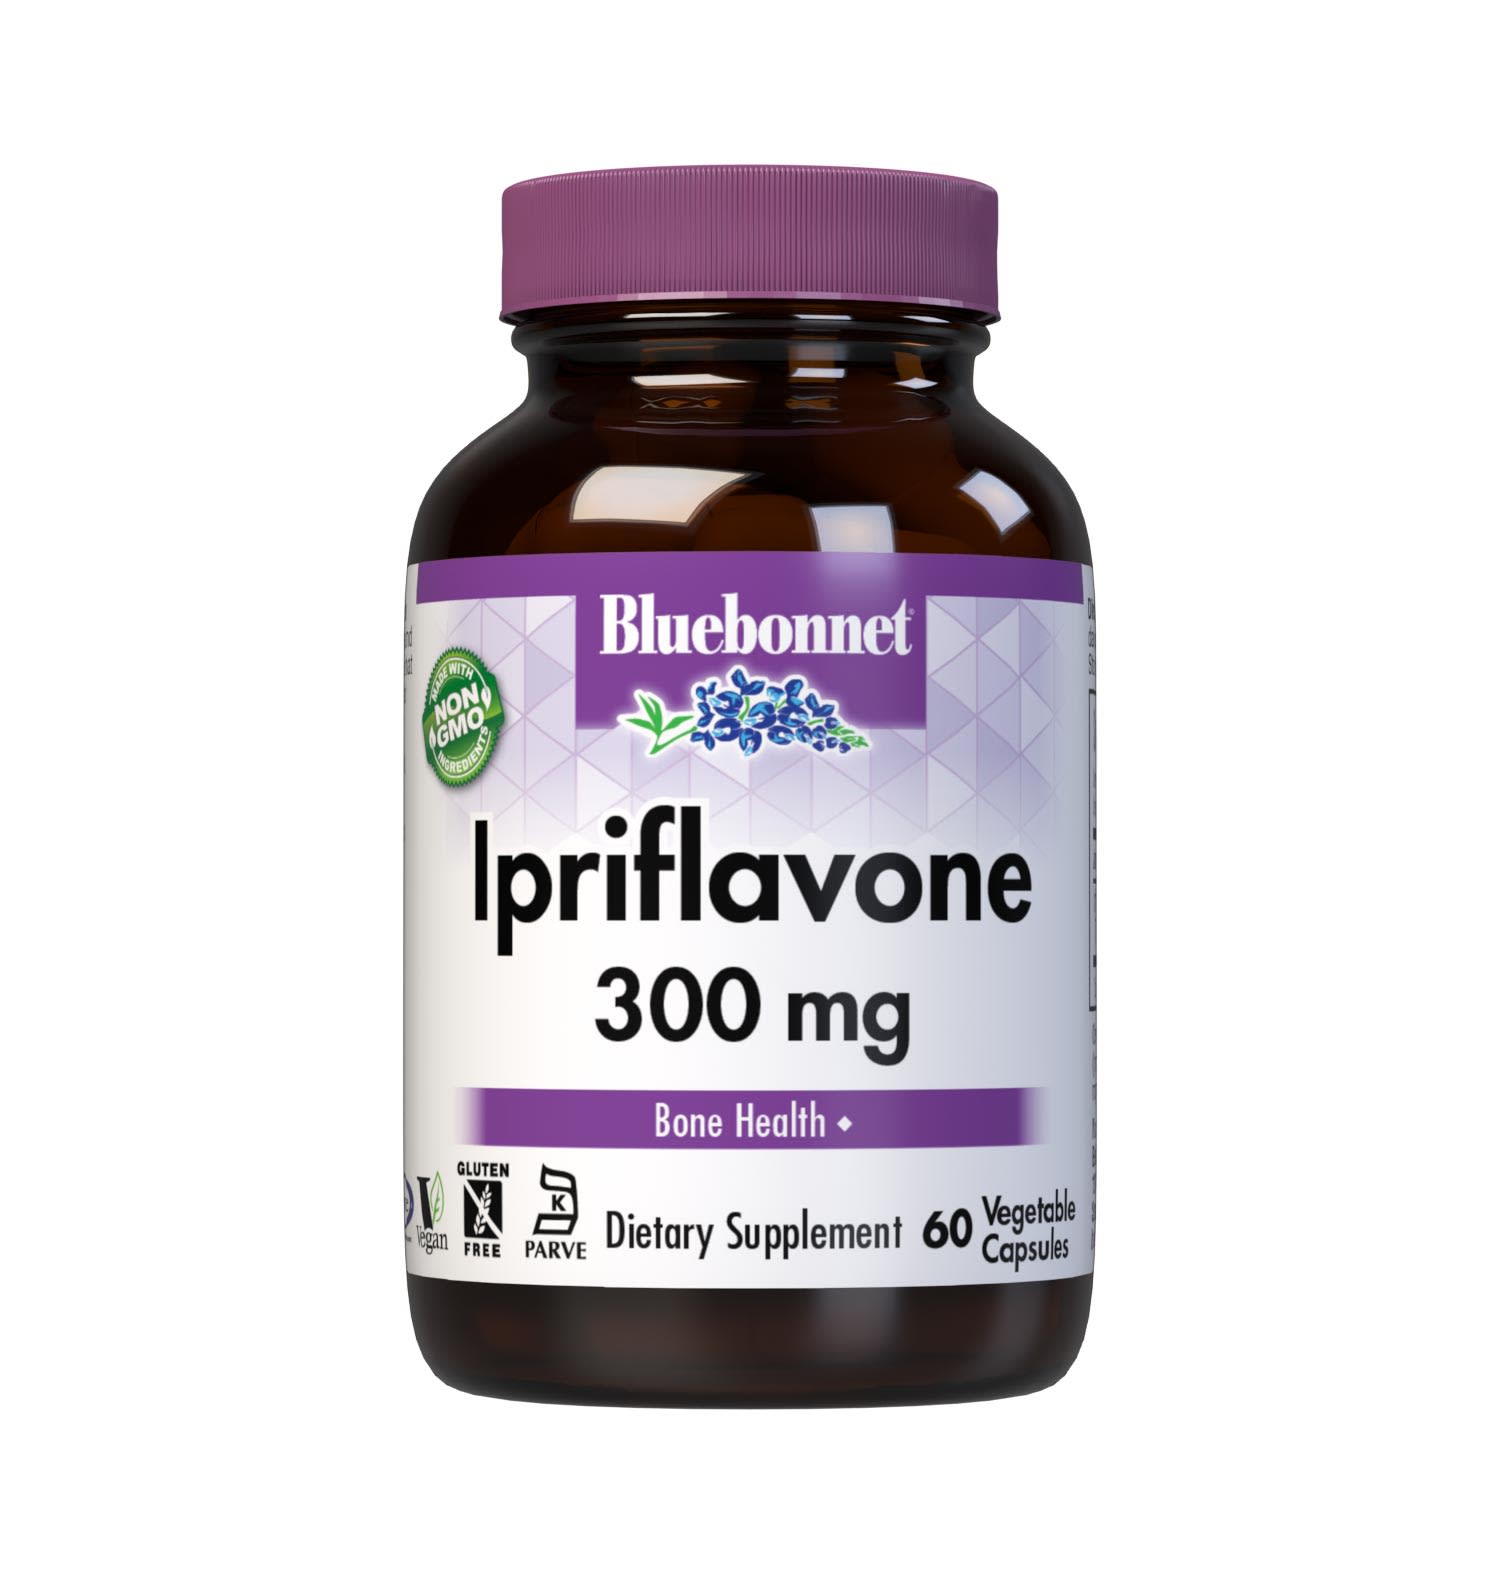 Bluebonnet’s Ipriflavone 300 mg 60 Vegetable Capsules are formulated with a concentrated source of patented and clinically studied Ostivone (ipriflavone), an isoflavone that supports a proper balance between bone formation and bone breakdown, aiding in overall bone health. #size_60 count